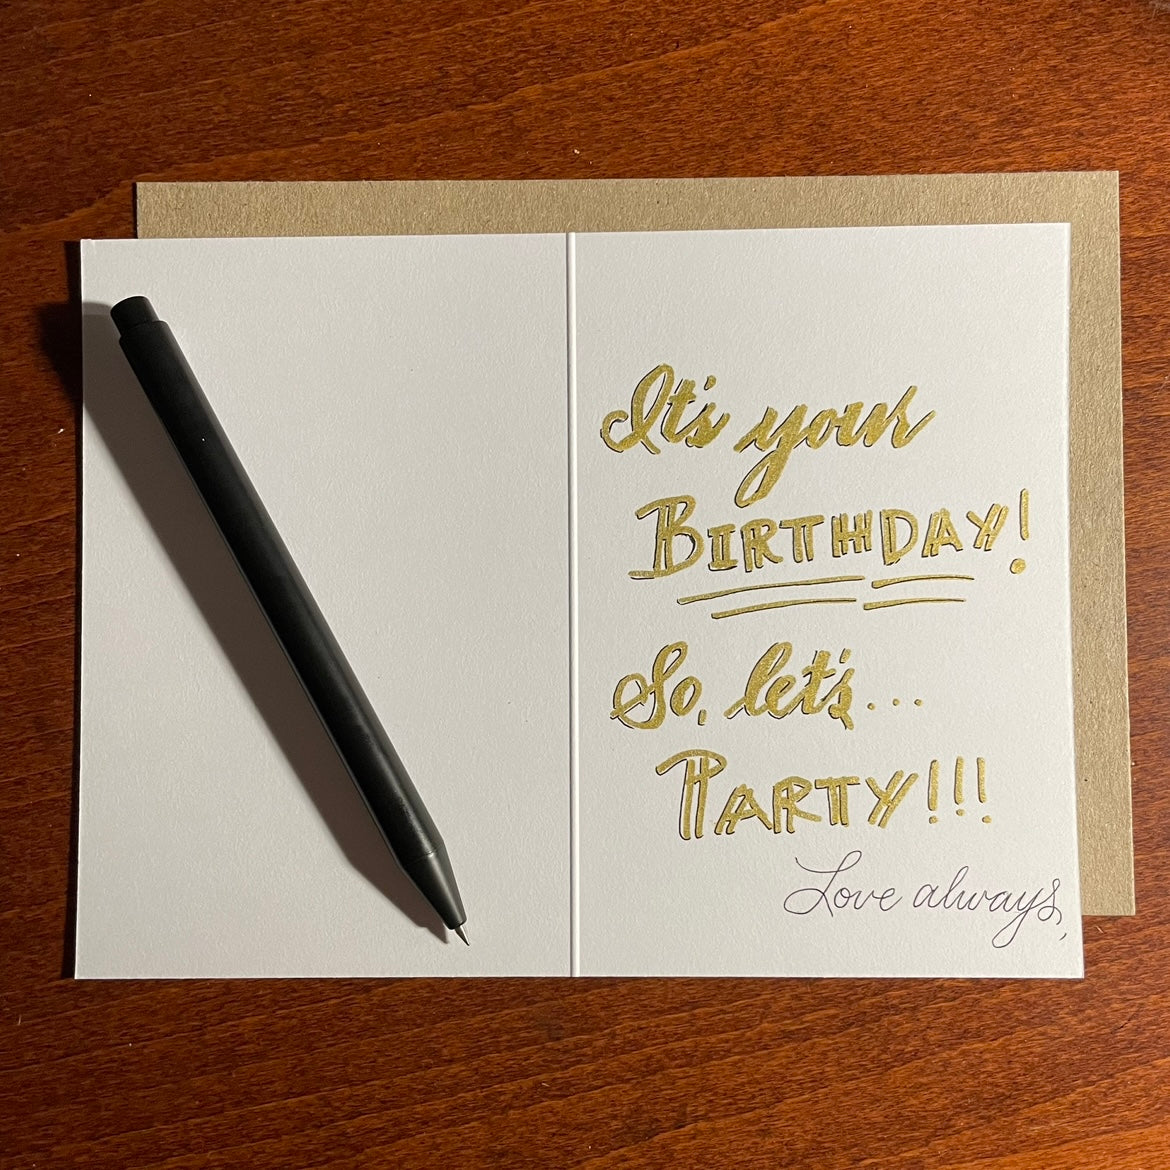 Add a handwritten message and have it mailed on your behalf by Nibs and Scripts; Text: "It's your birthday! So let's Party!! Love always" | Calligraphy and Stationery, Nibs and Scripts